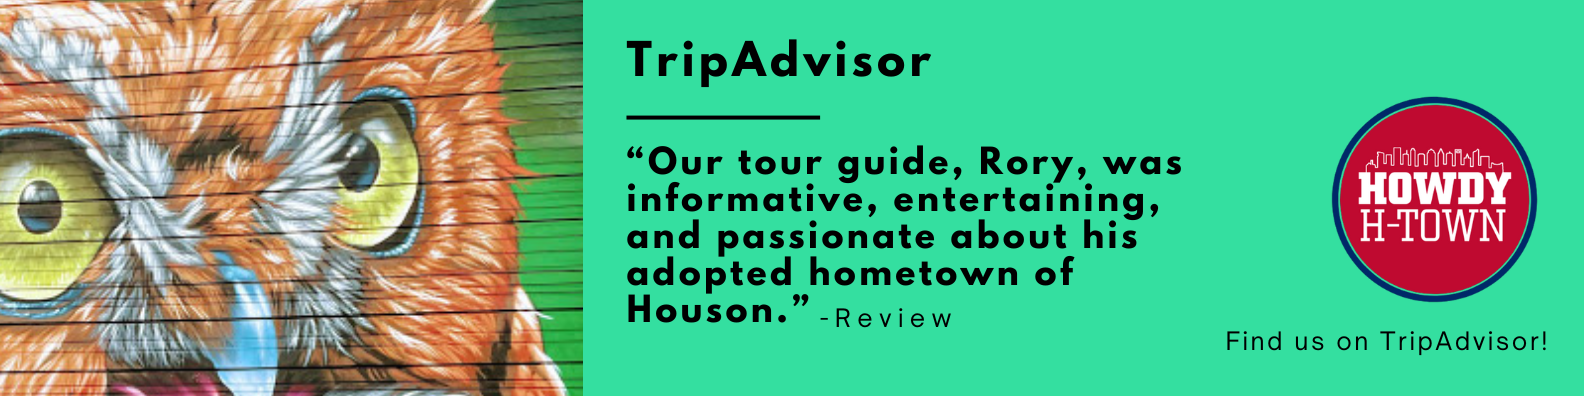 HTX Website Design Graphic for howdy h-town trip advisor page